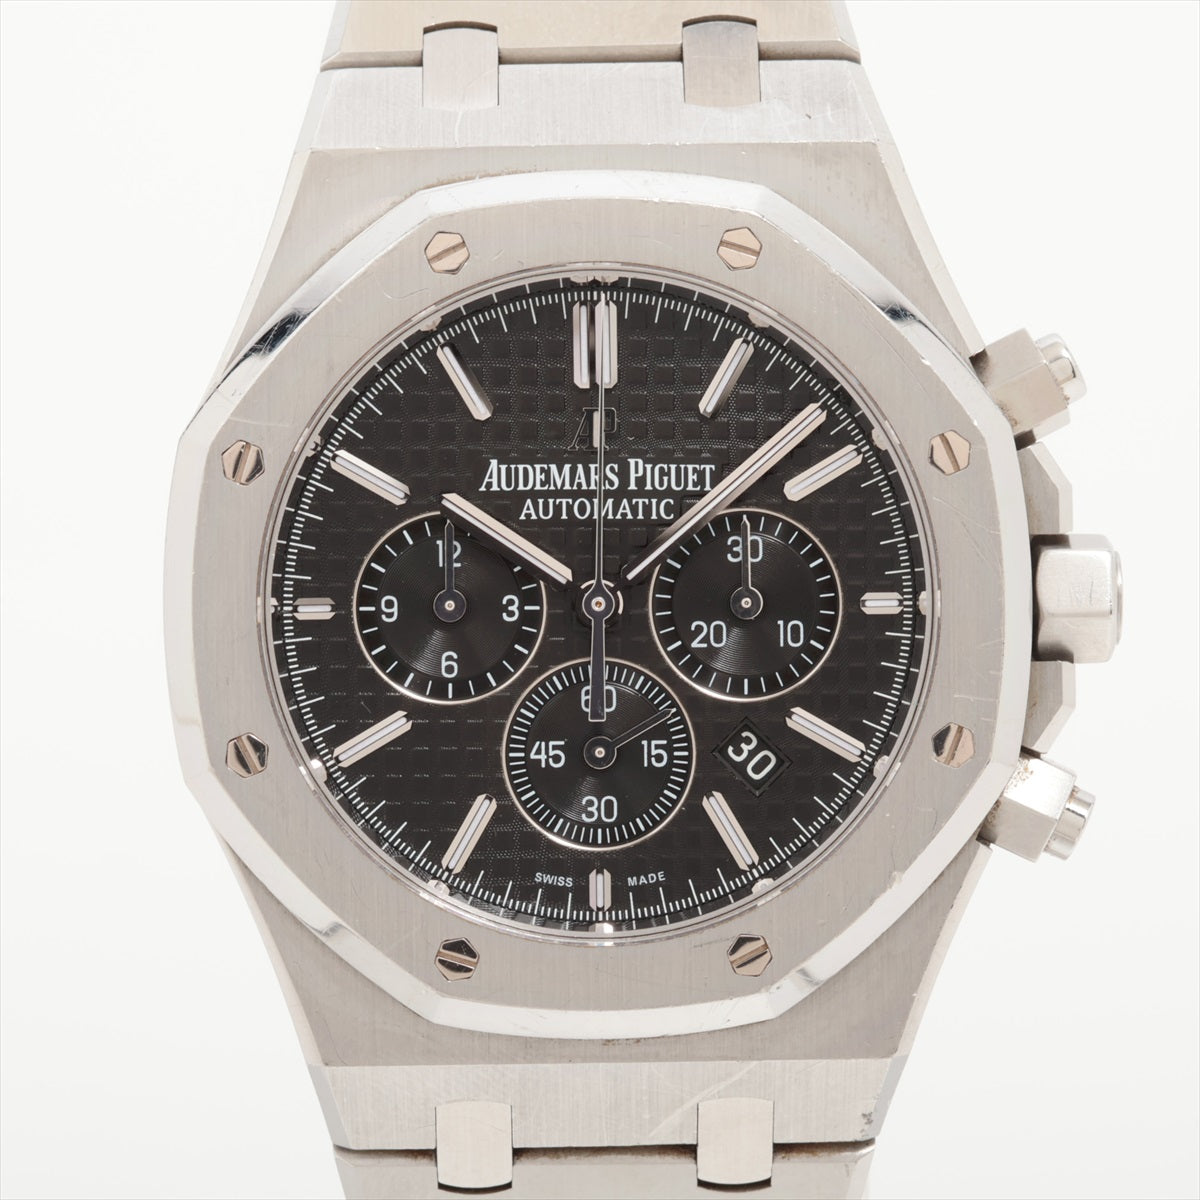 Audemars Piguet Royal Oak Chronograph 26320ST.OO.1220ST.01 SS AT Black Dial 2 Extra Links Our OH paid